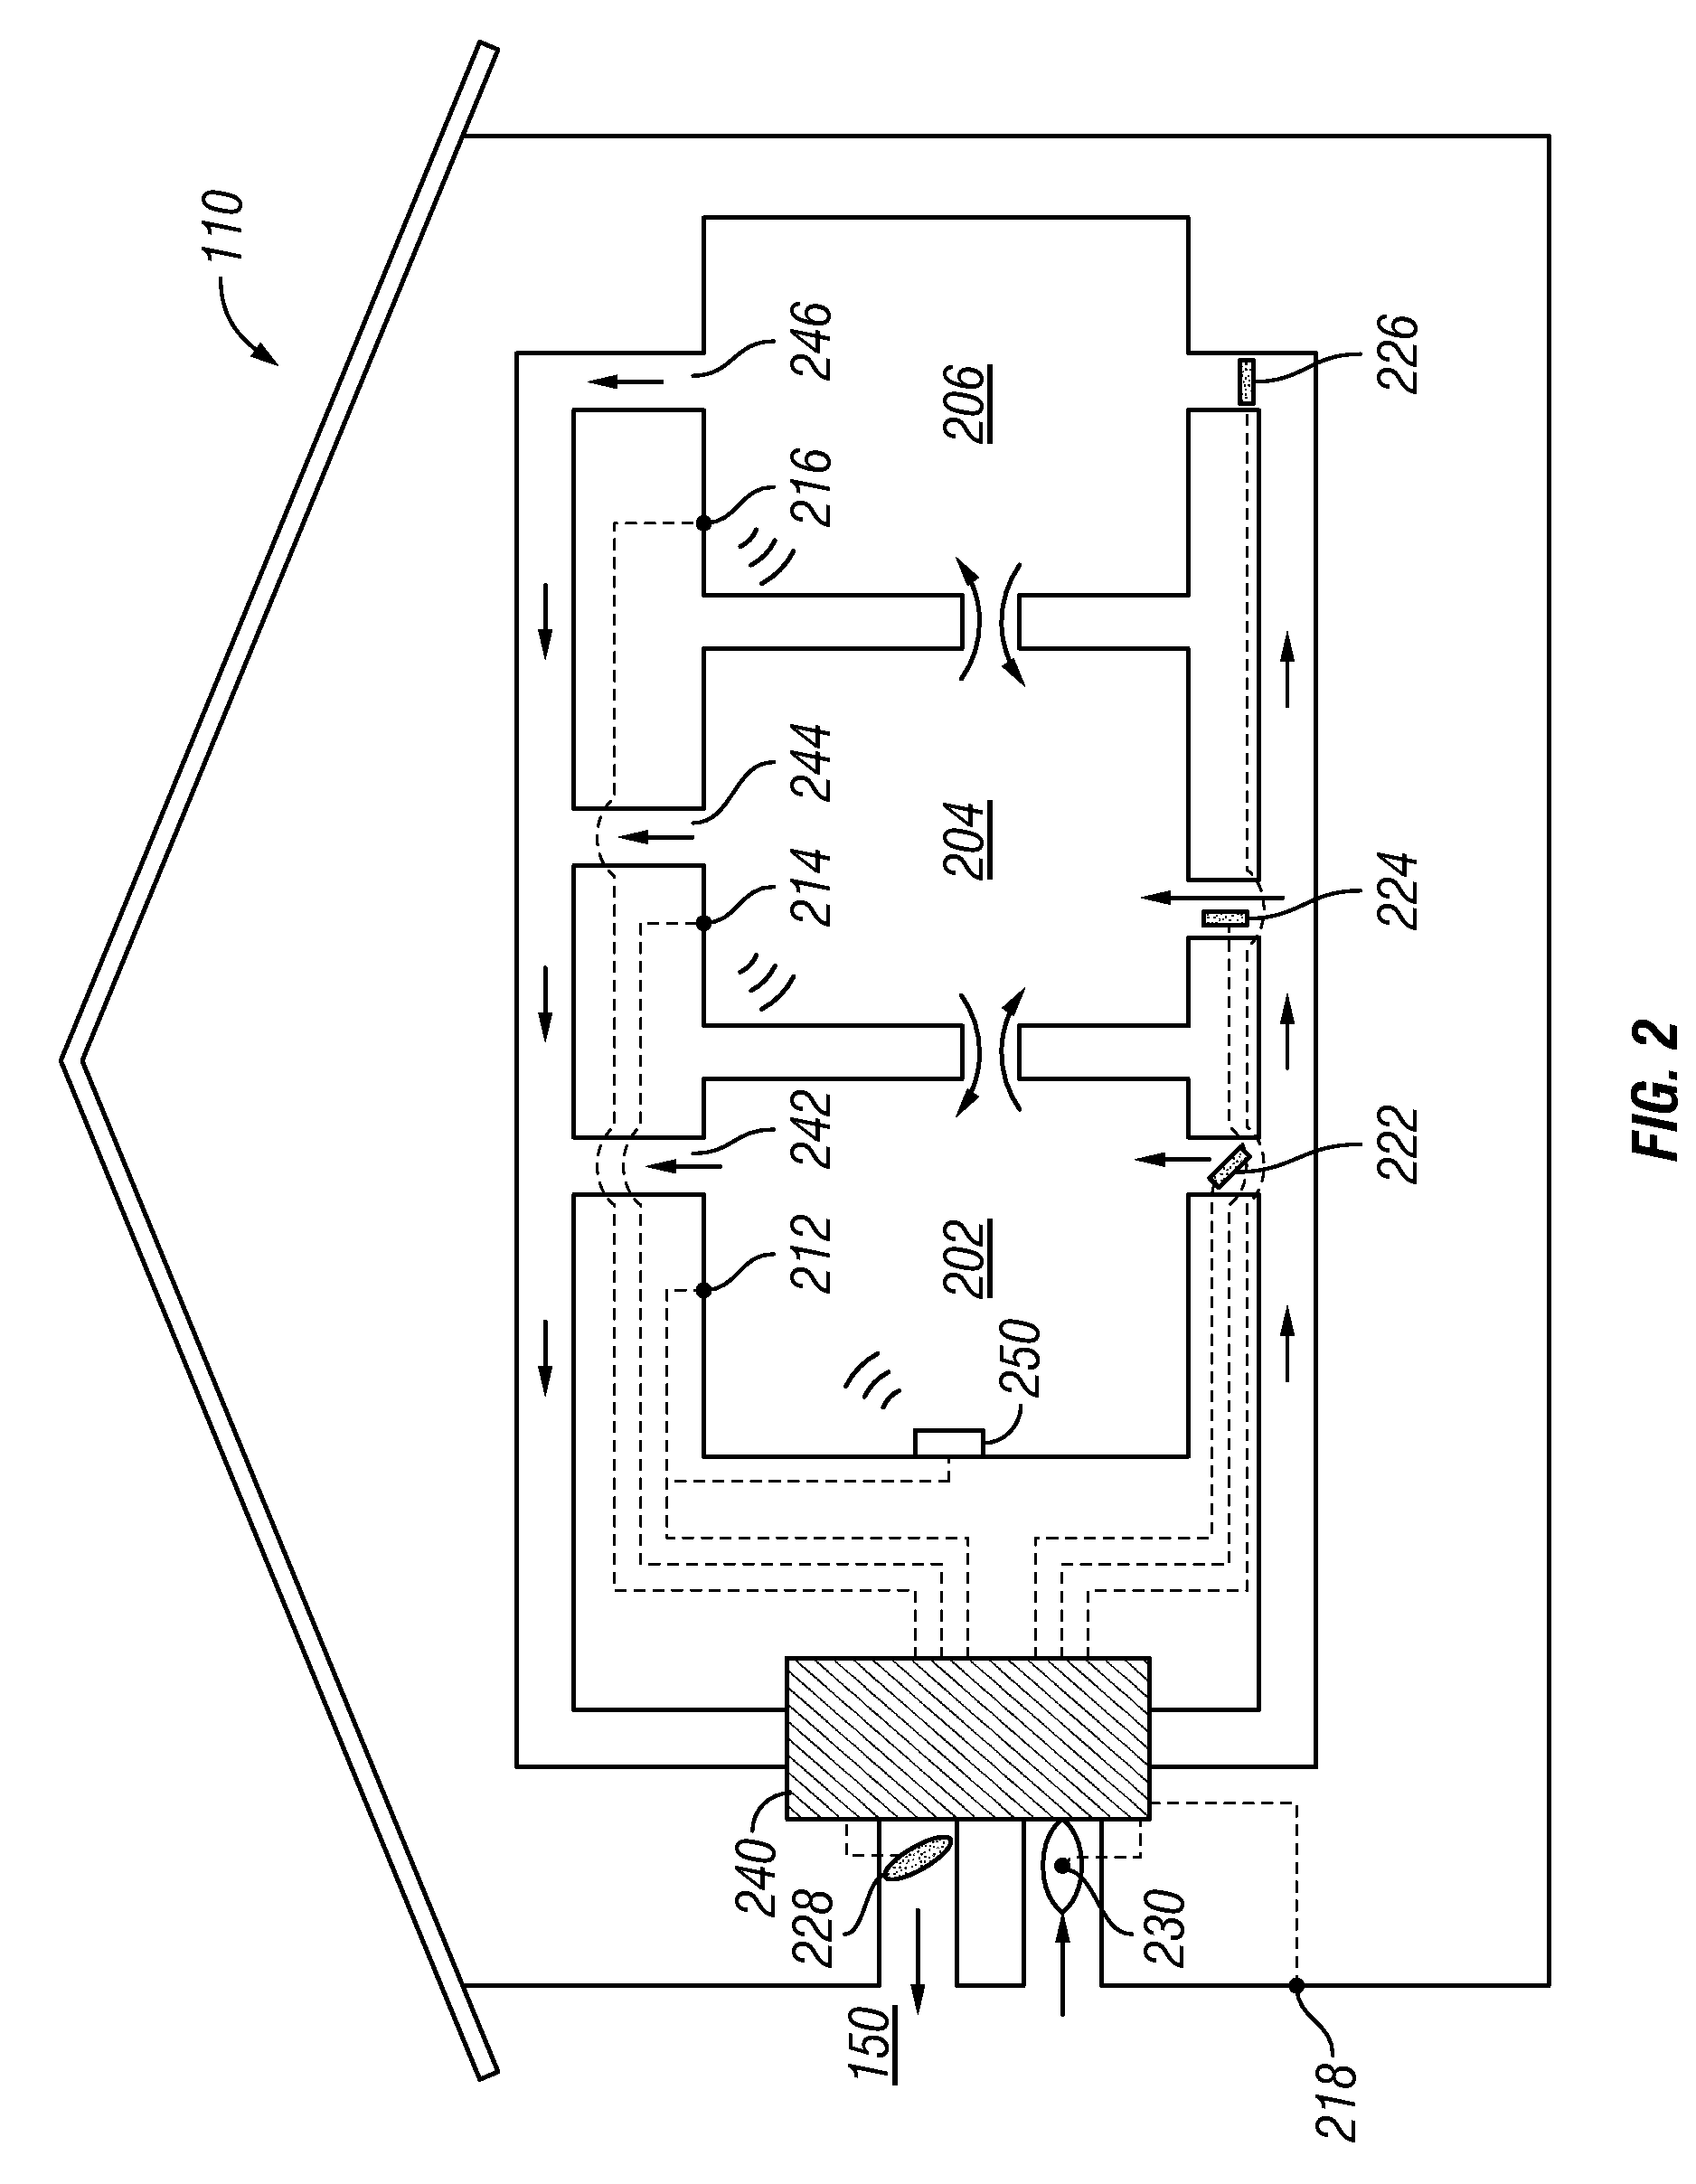 Method for controlling multiple indoor air quality parameters